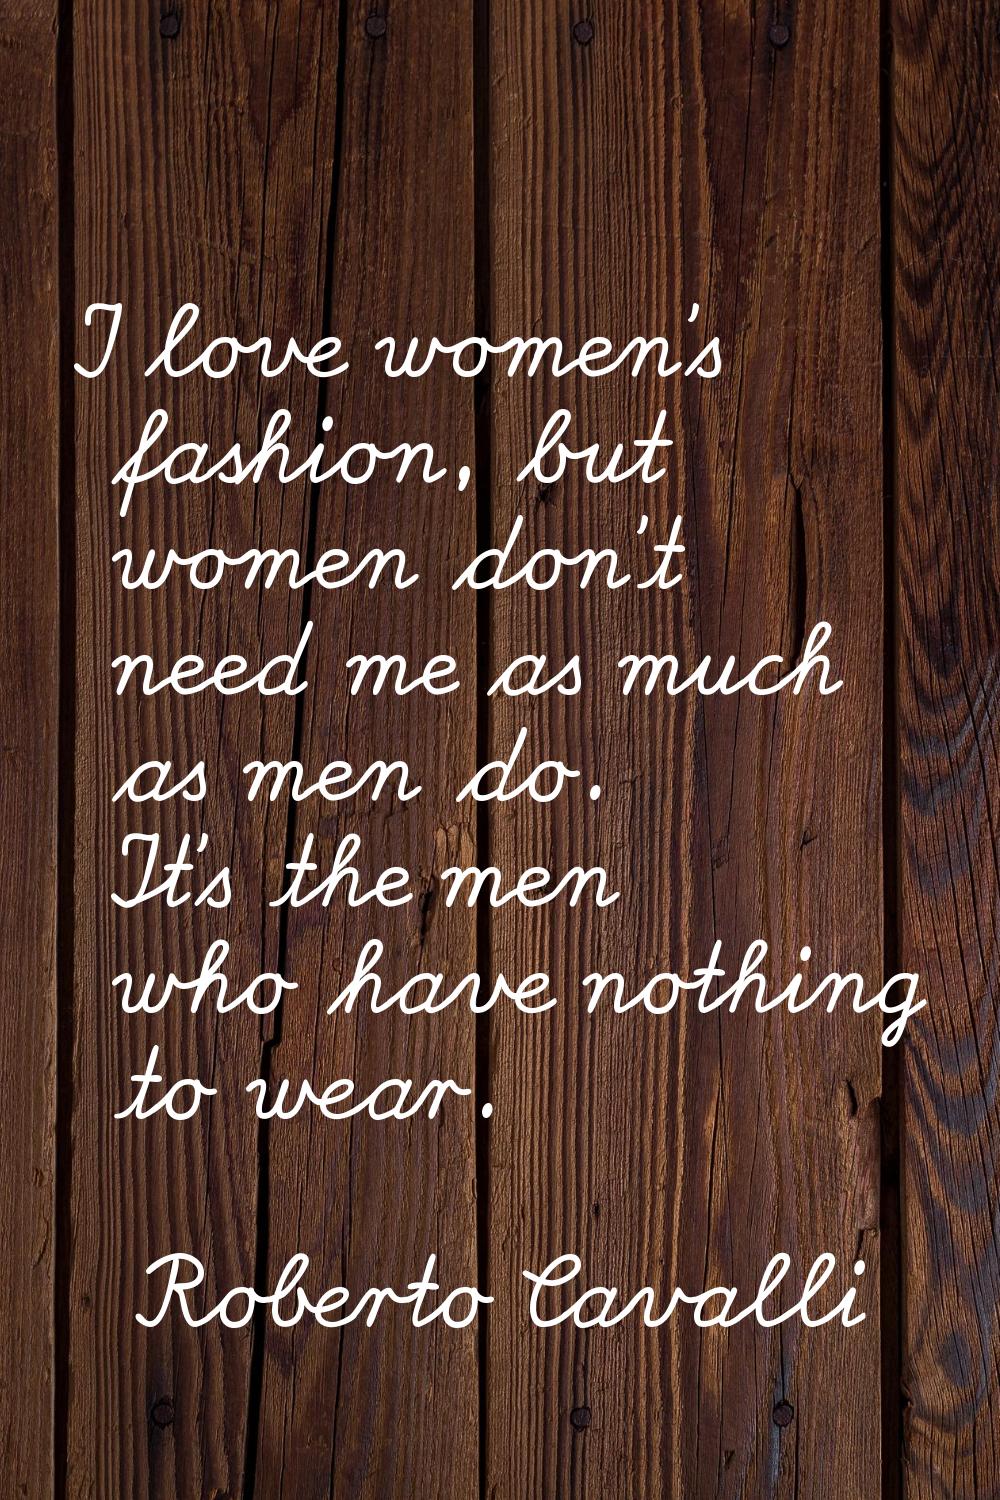 I love women's fashion, but women don't need me as much as men do. It's the men who have nothing to